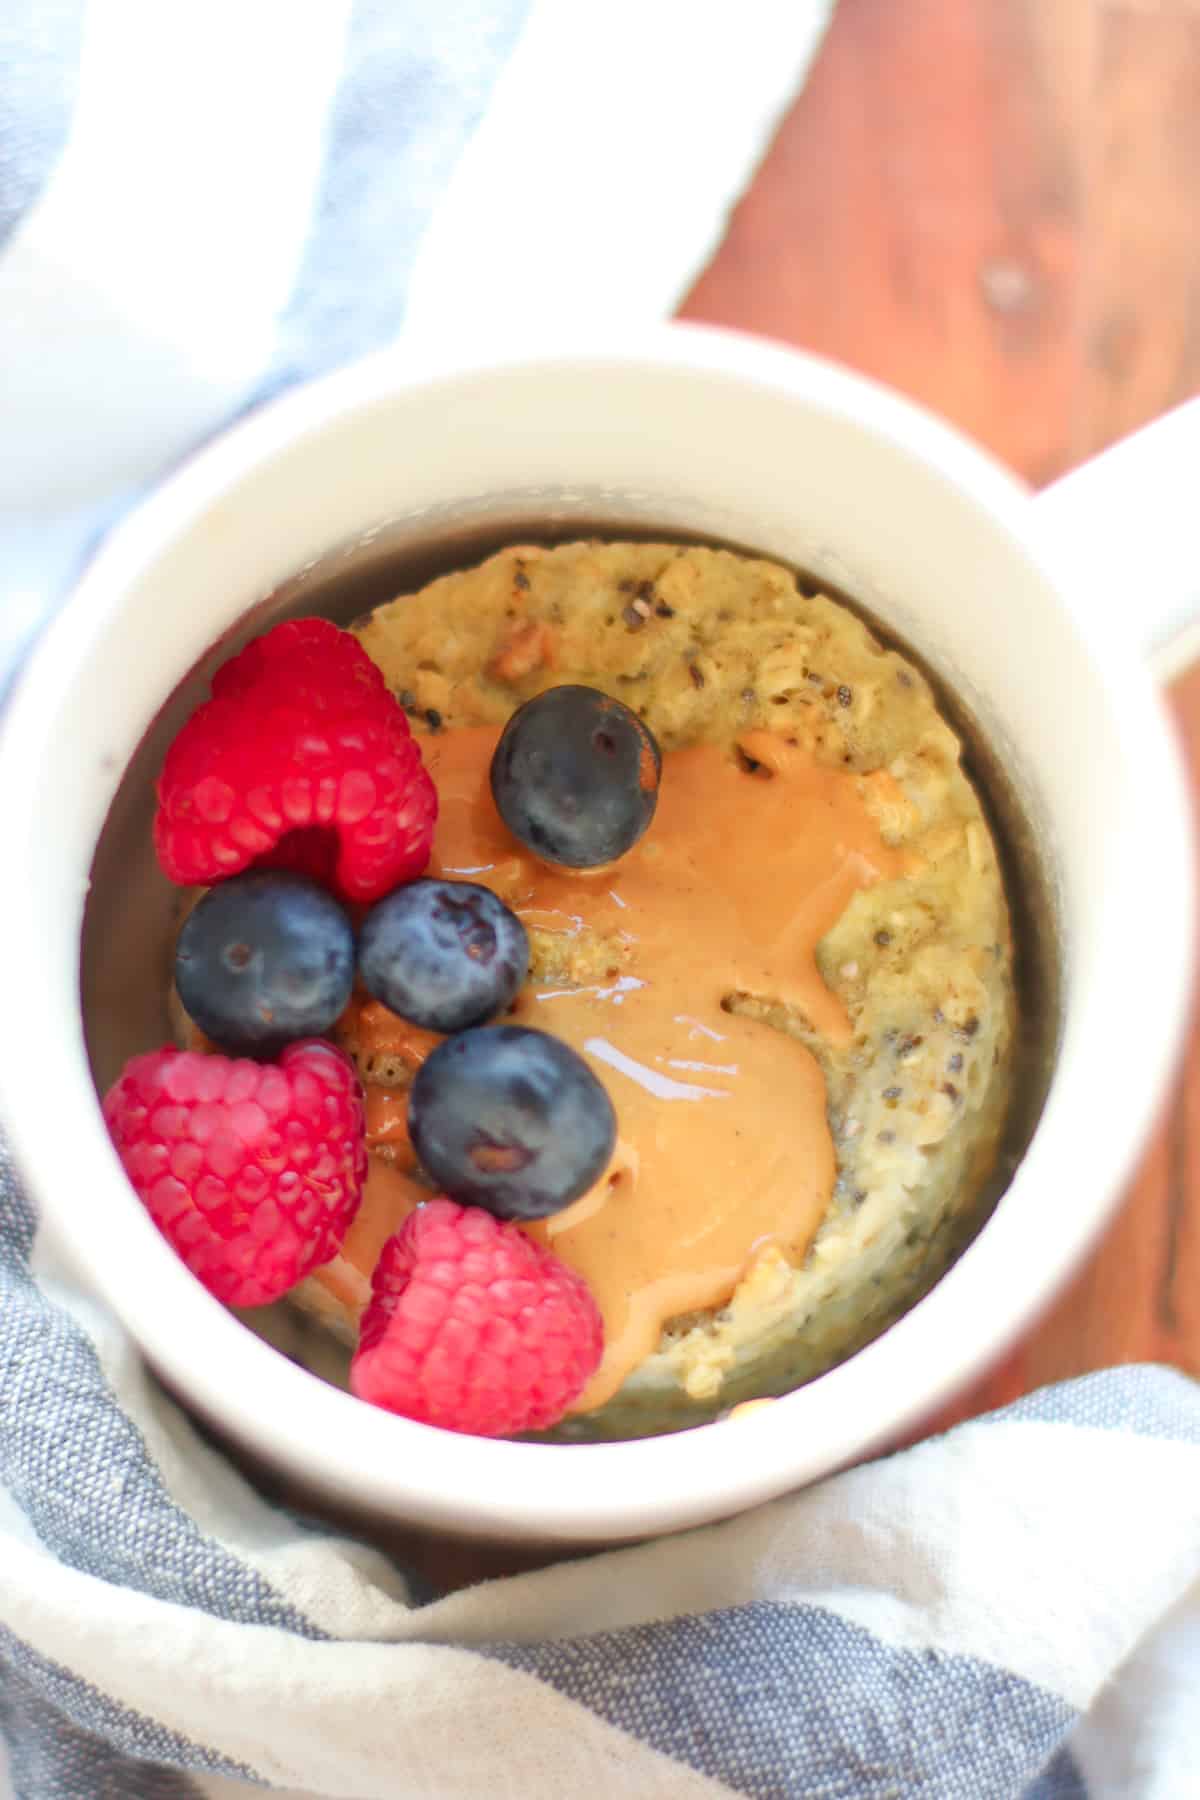 Cooked oatmeal mug cake with peanut butter and berries.